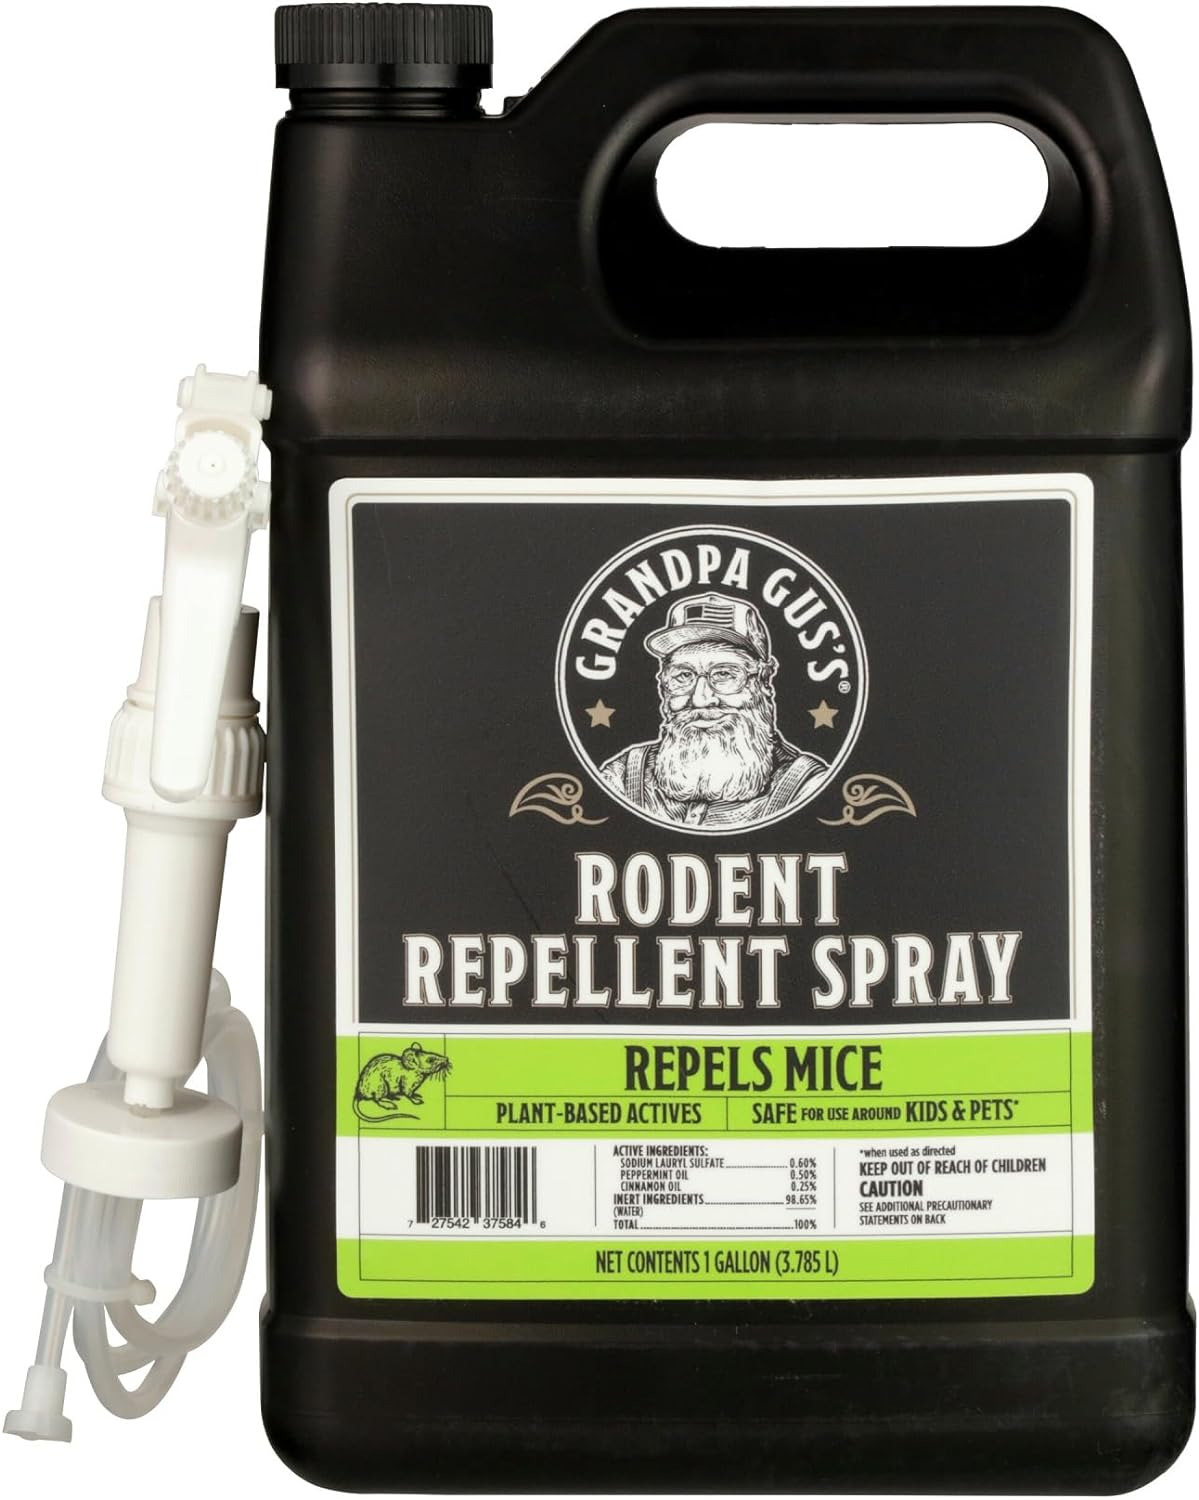 Rodent Repellent Spray with Sprayer, Repel Mice & Stop Rats & Squirrels 1 Gallon